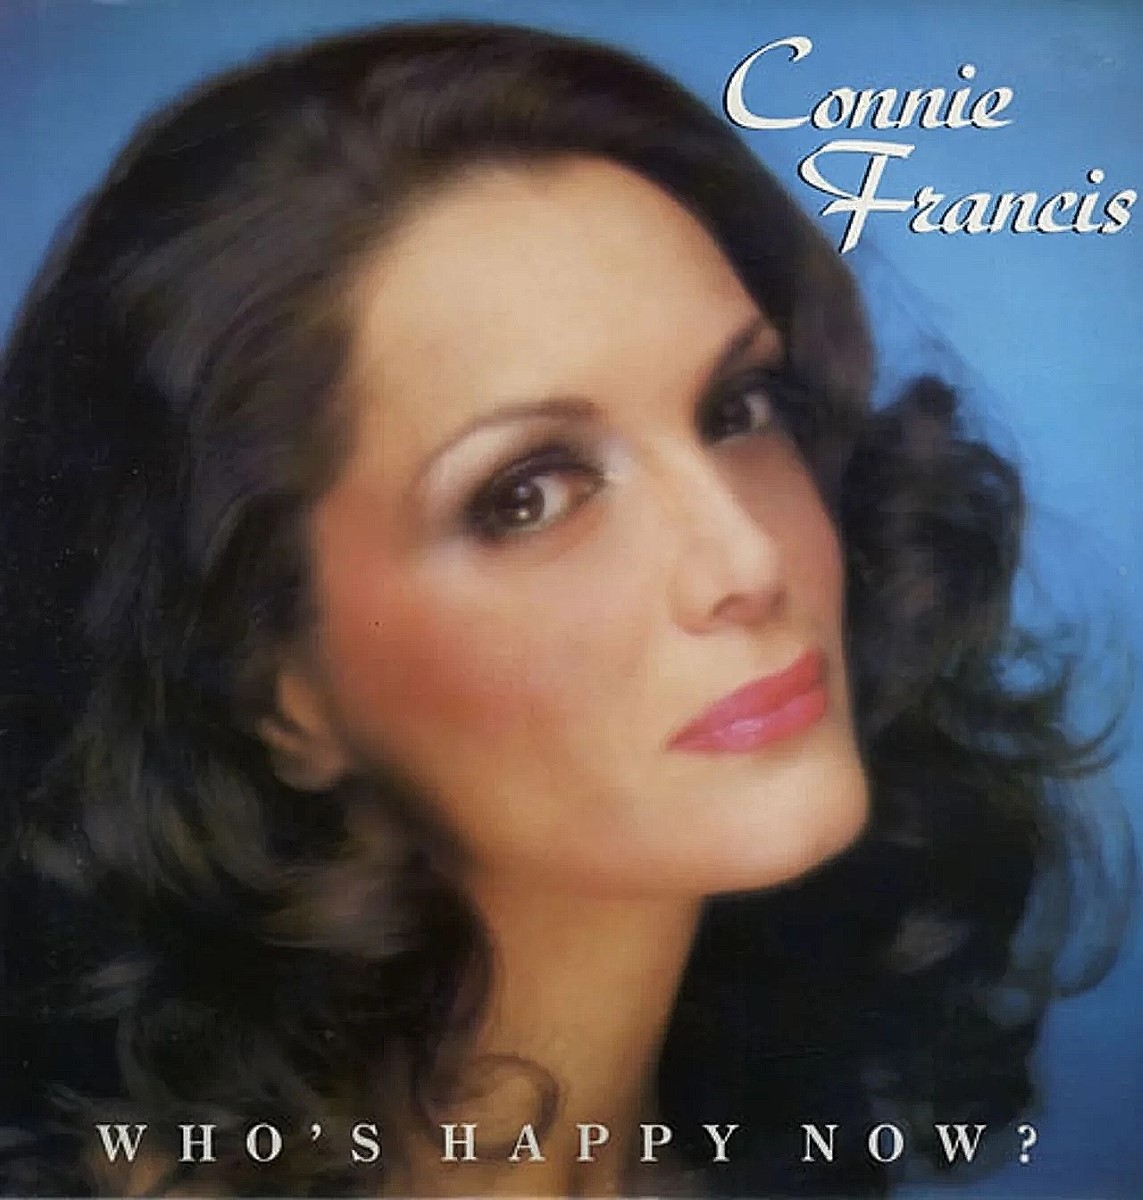 Connie Francis - Who's Happy Now (1978)